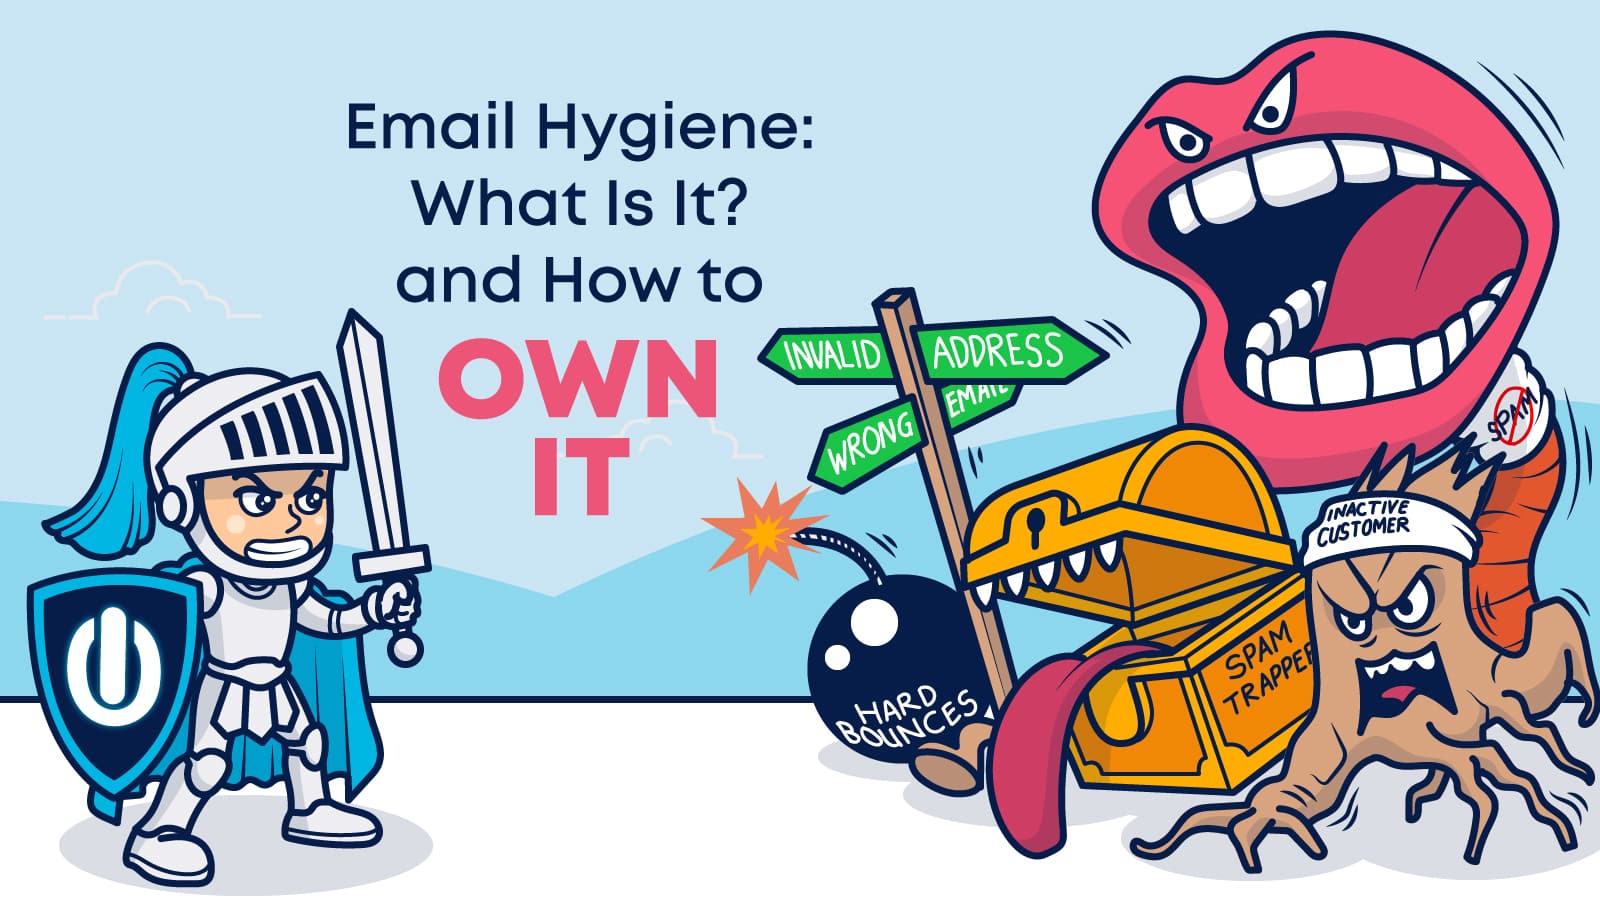 The email hygiene complete guide